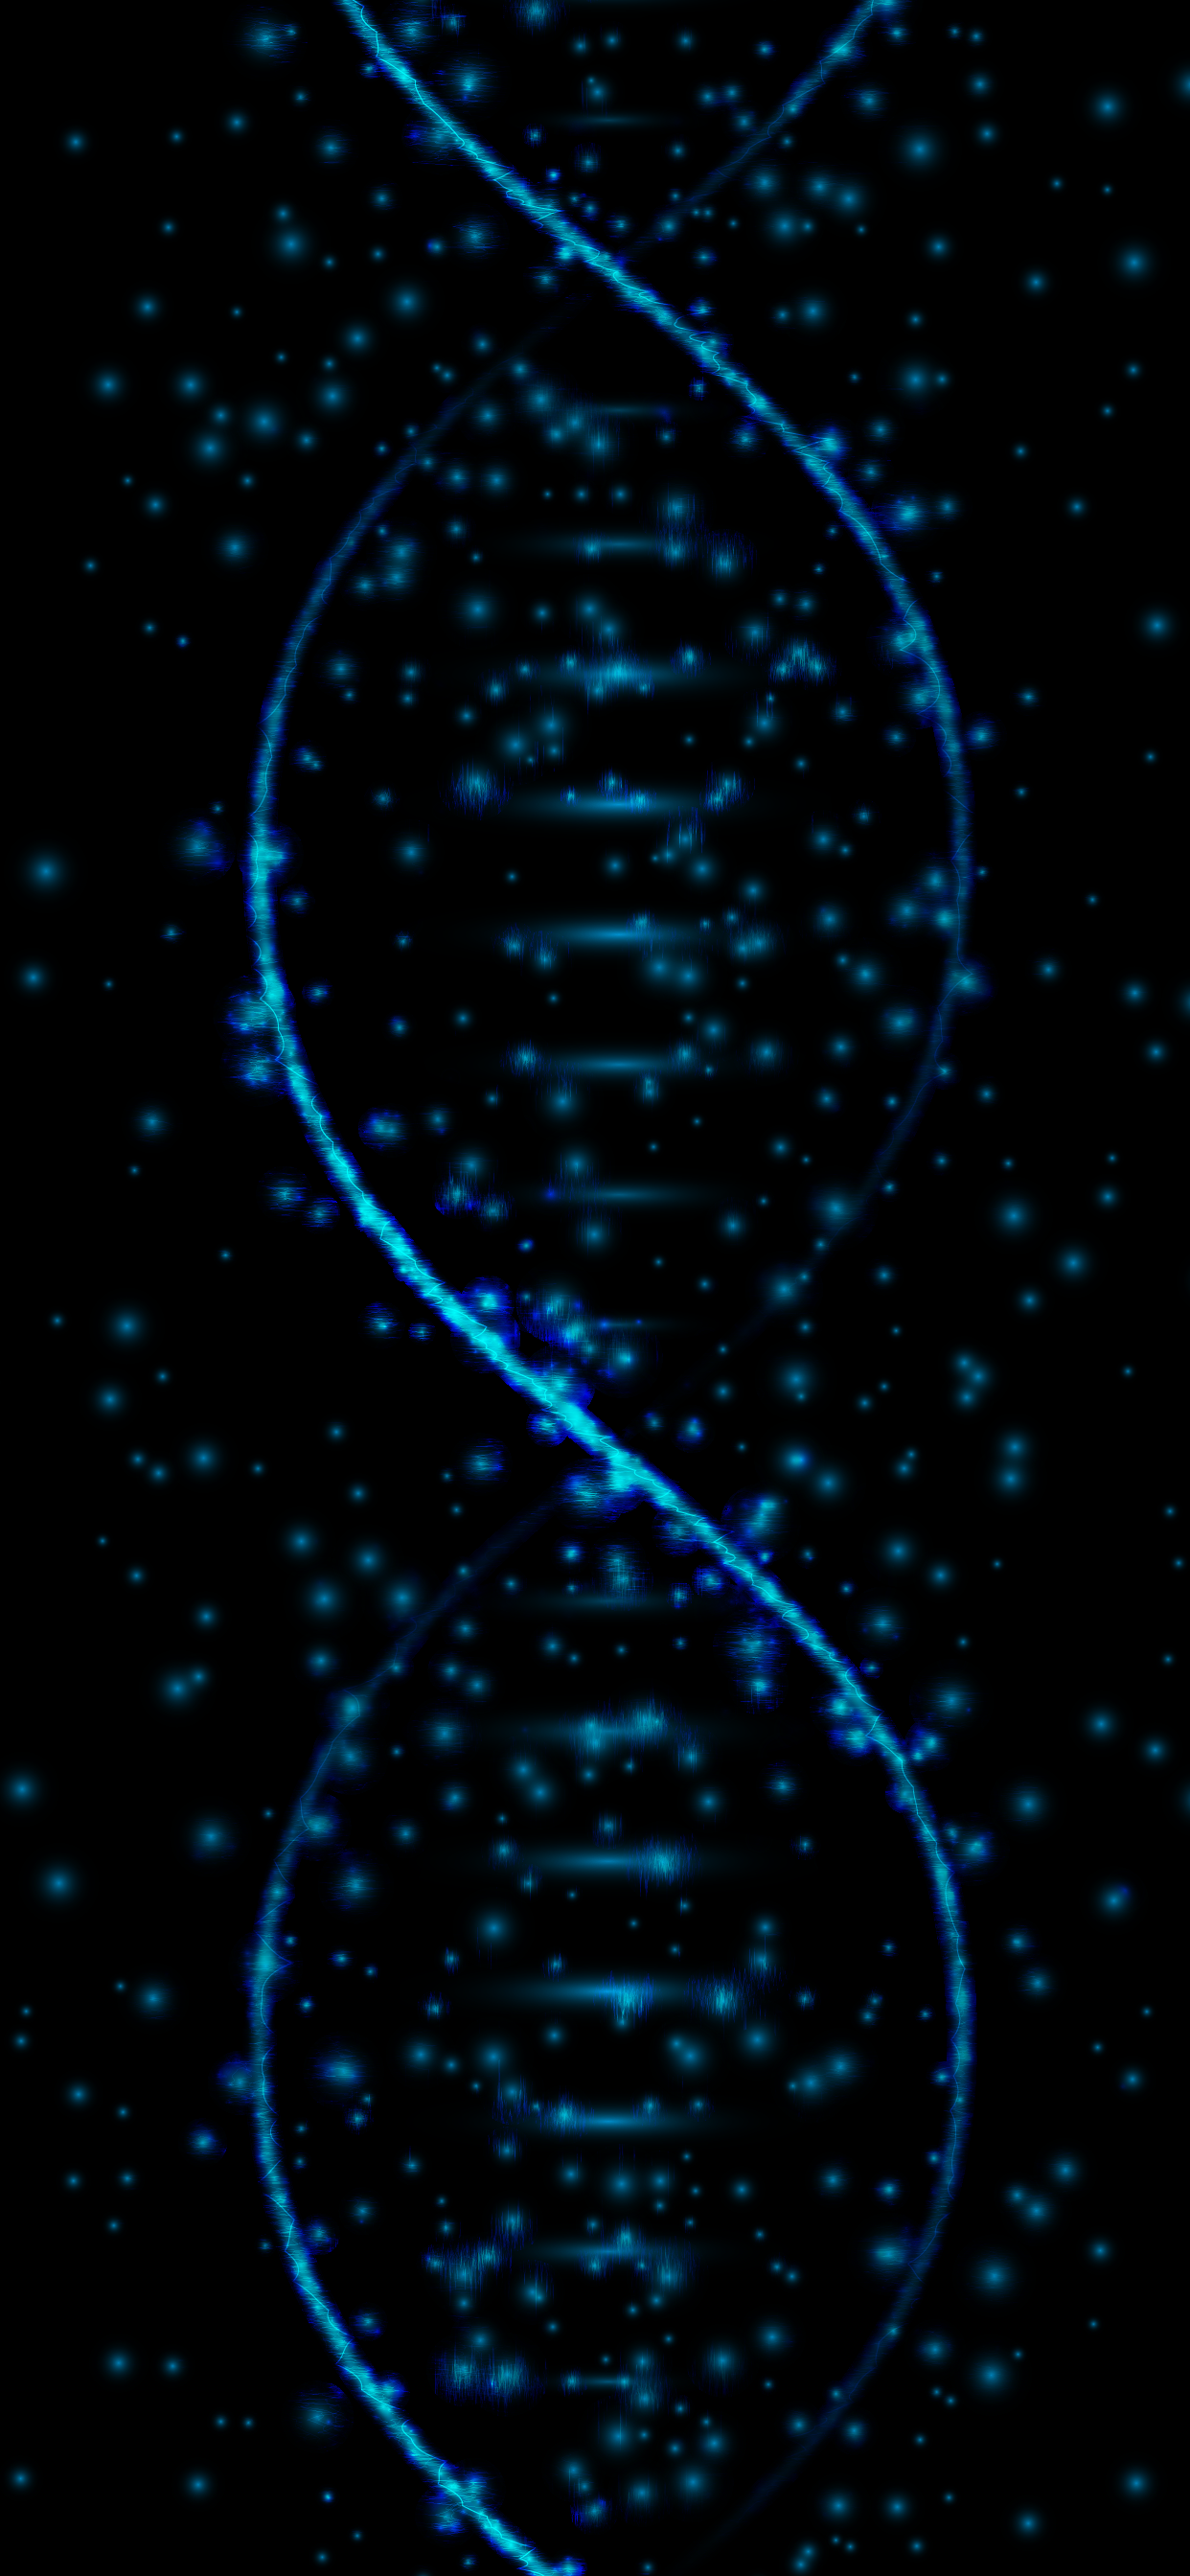 medicine dna science wallpaper hd for phone